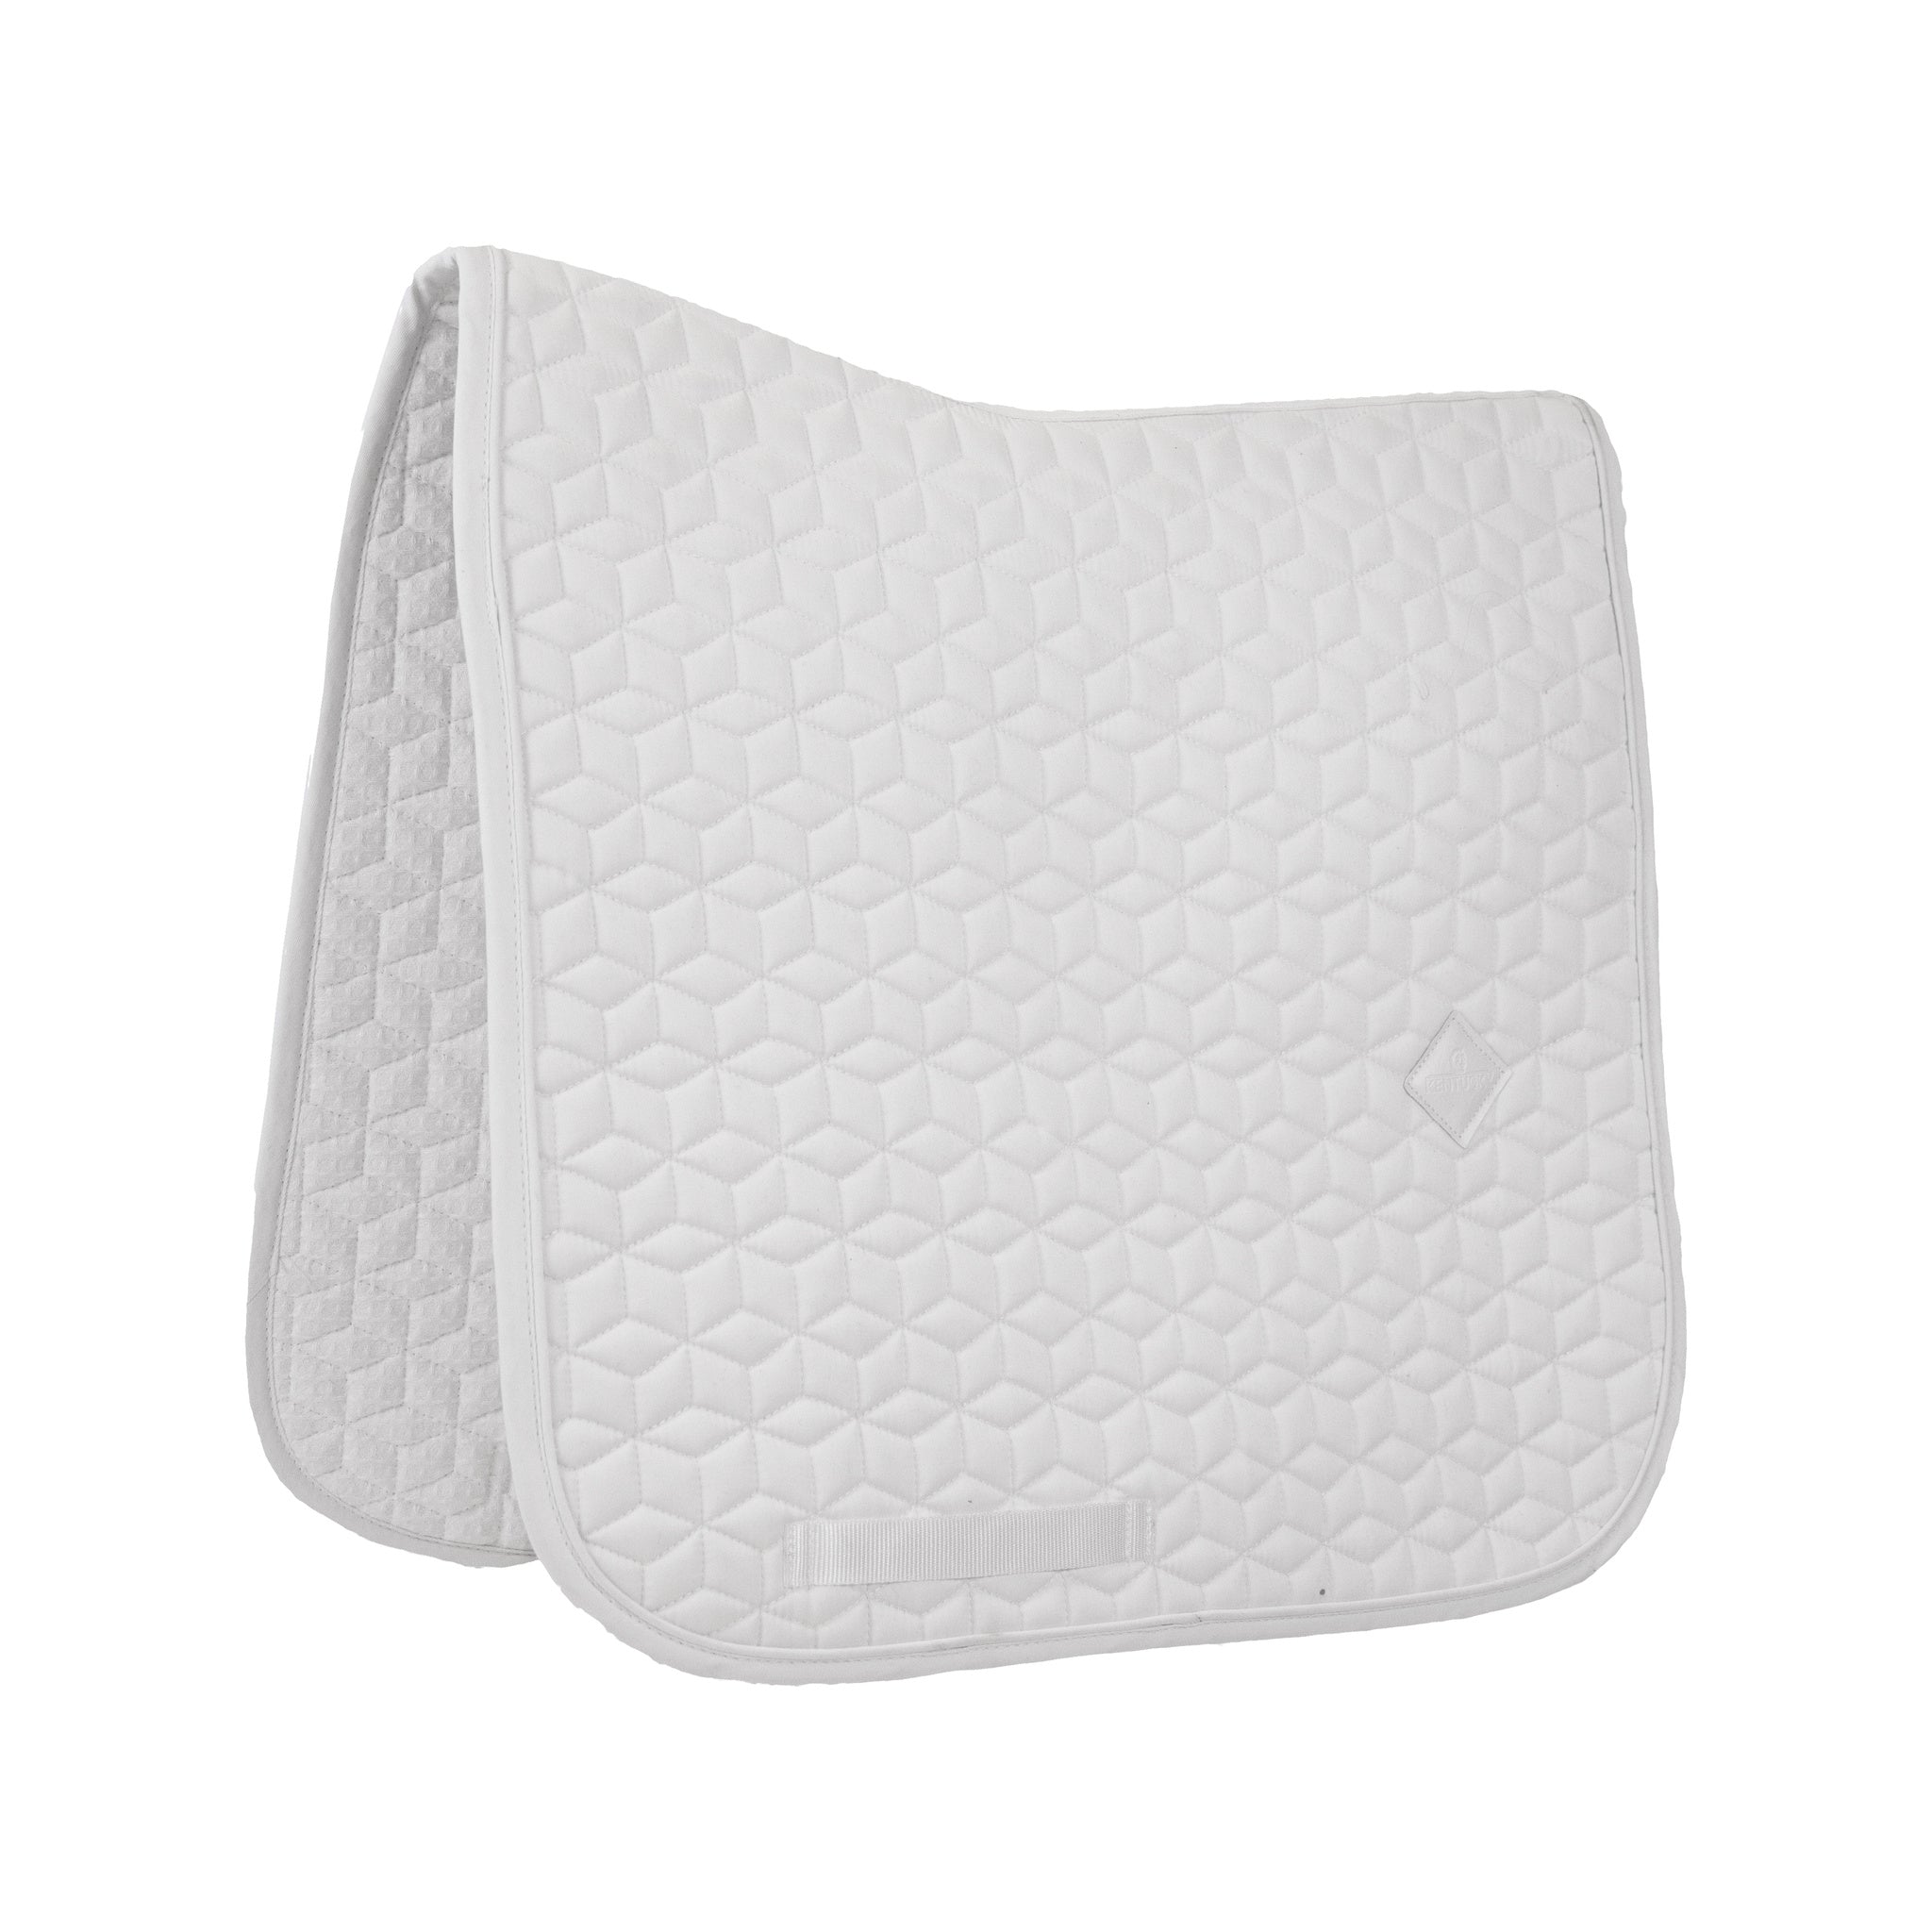 The all white classic dressage pad by Kentucky is the perfect timeless and classy saddle pad for competitions or riding at home for a more simplistic look.